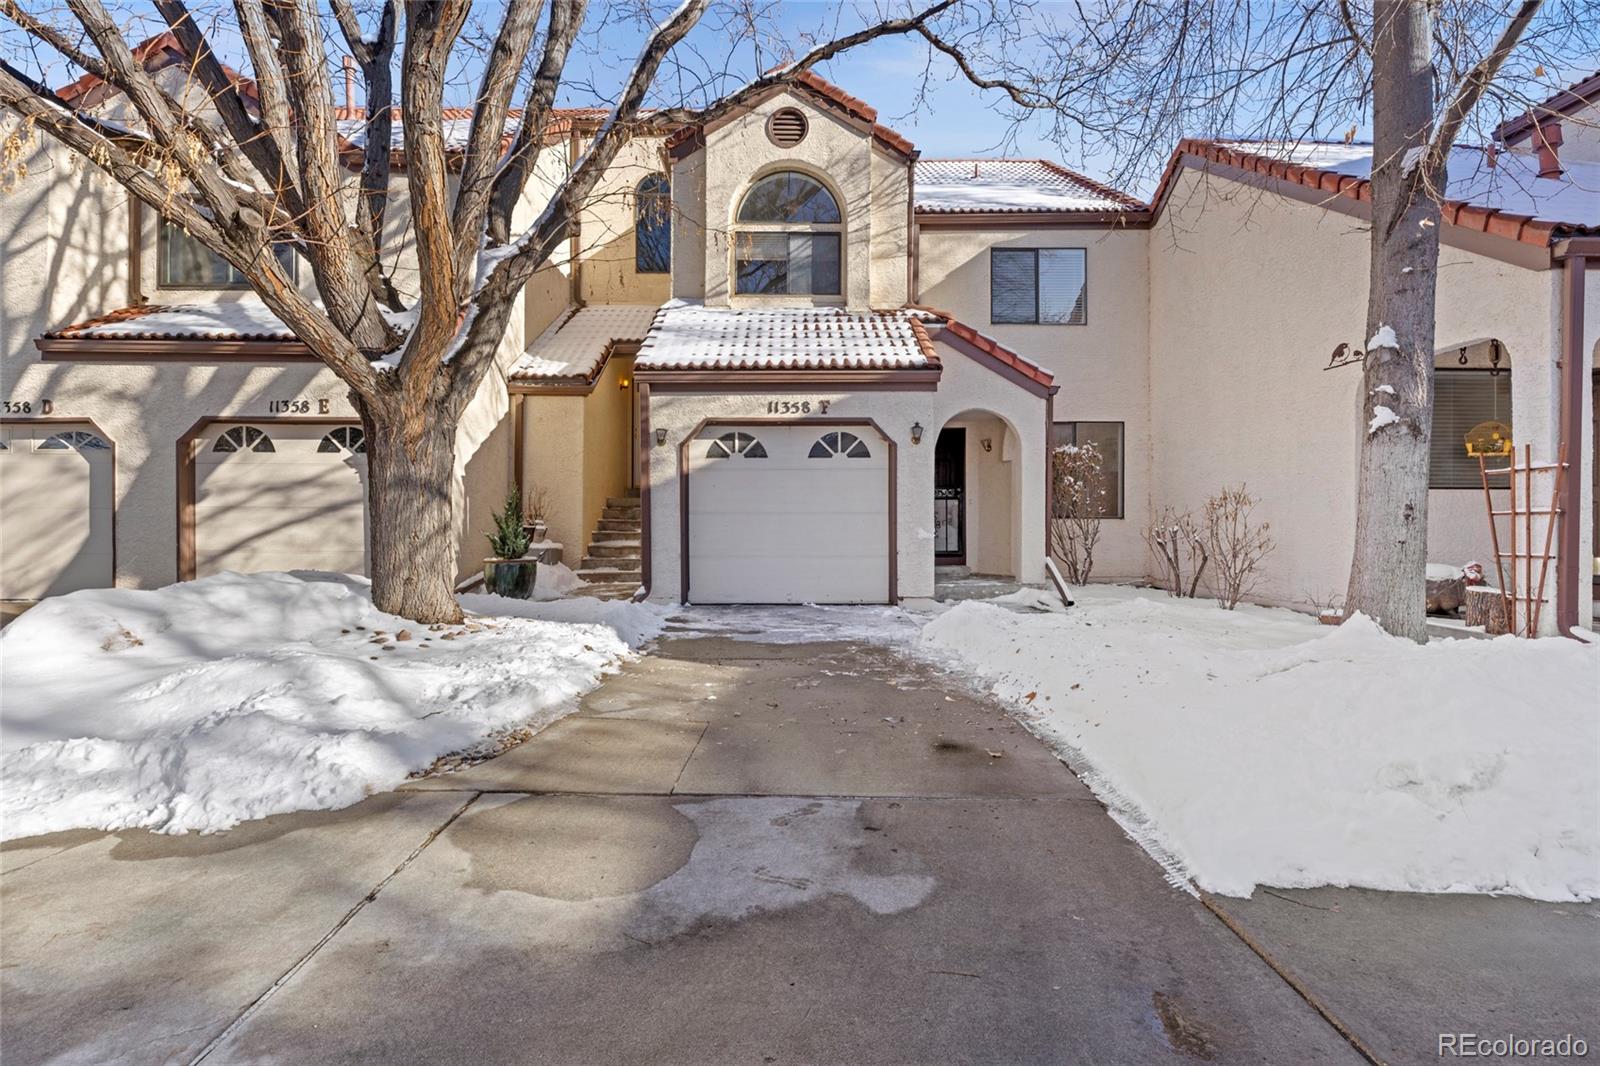 Report Image for 11358 W 85th Place,Arvada, Colorado